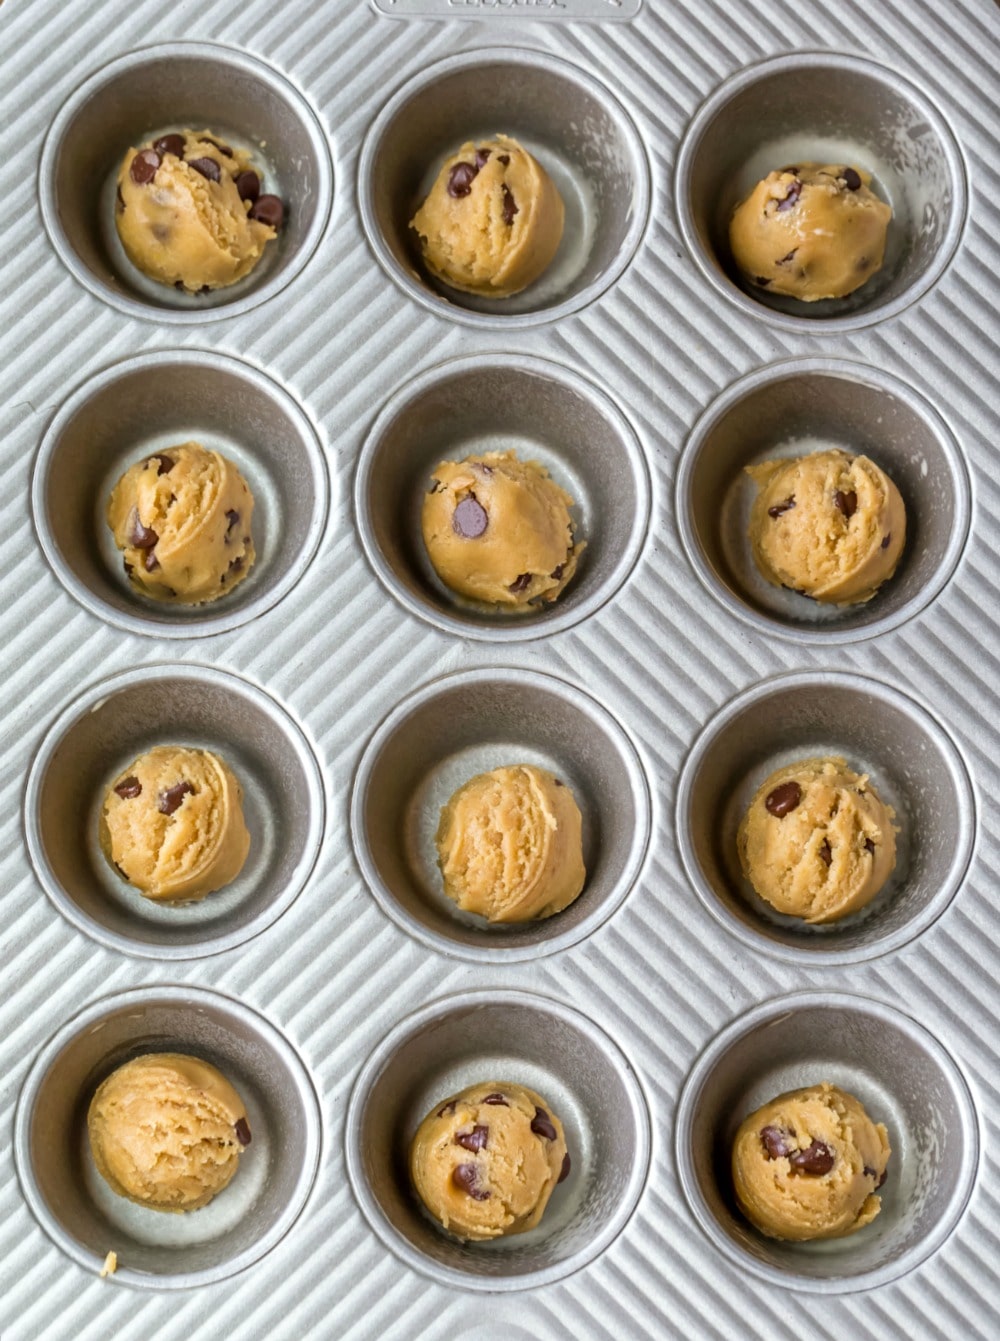 https://www.ihearteating.com/wp-content/uploads/2018/02/muffin-tin-chocolate-chip-cookies-1-1000.jpg